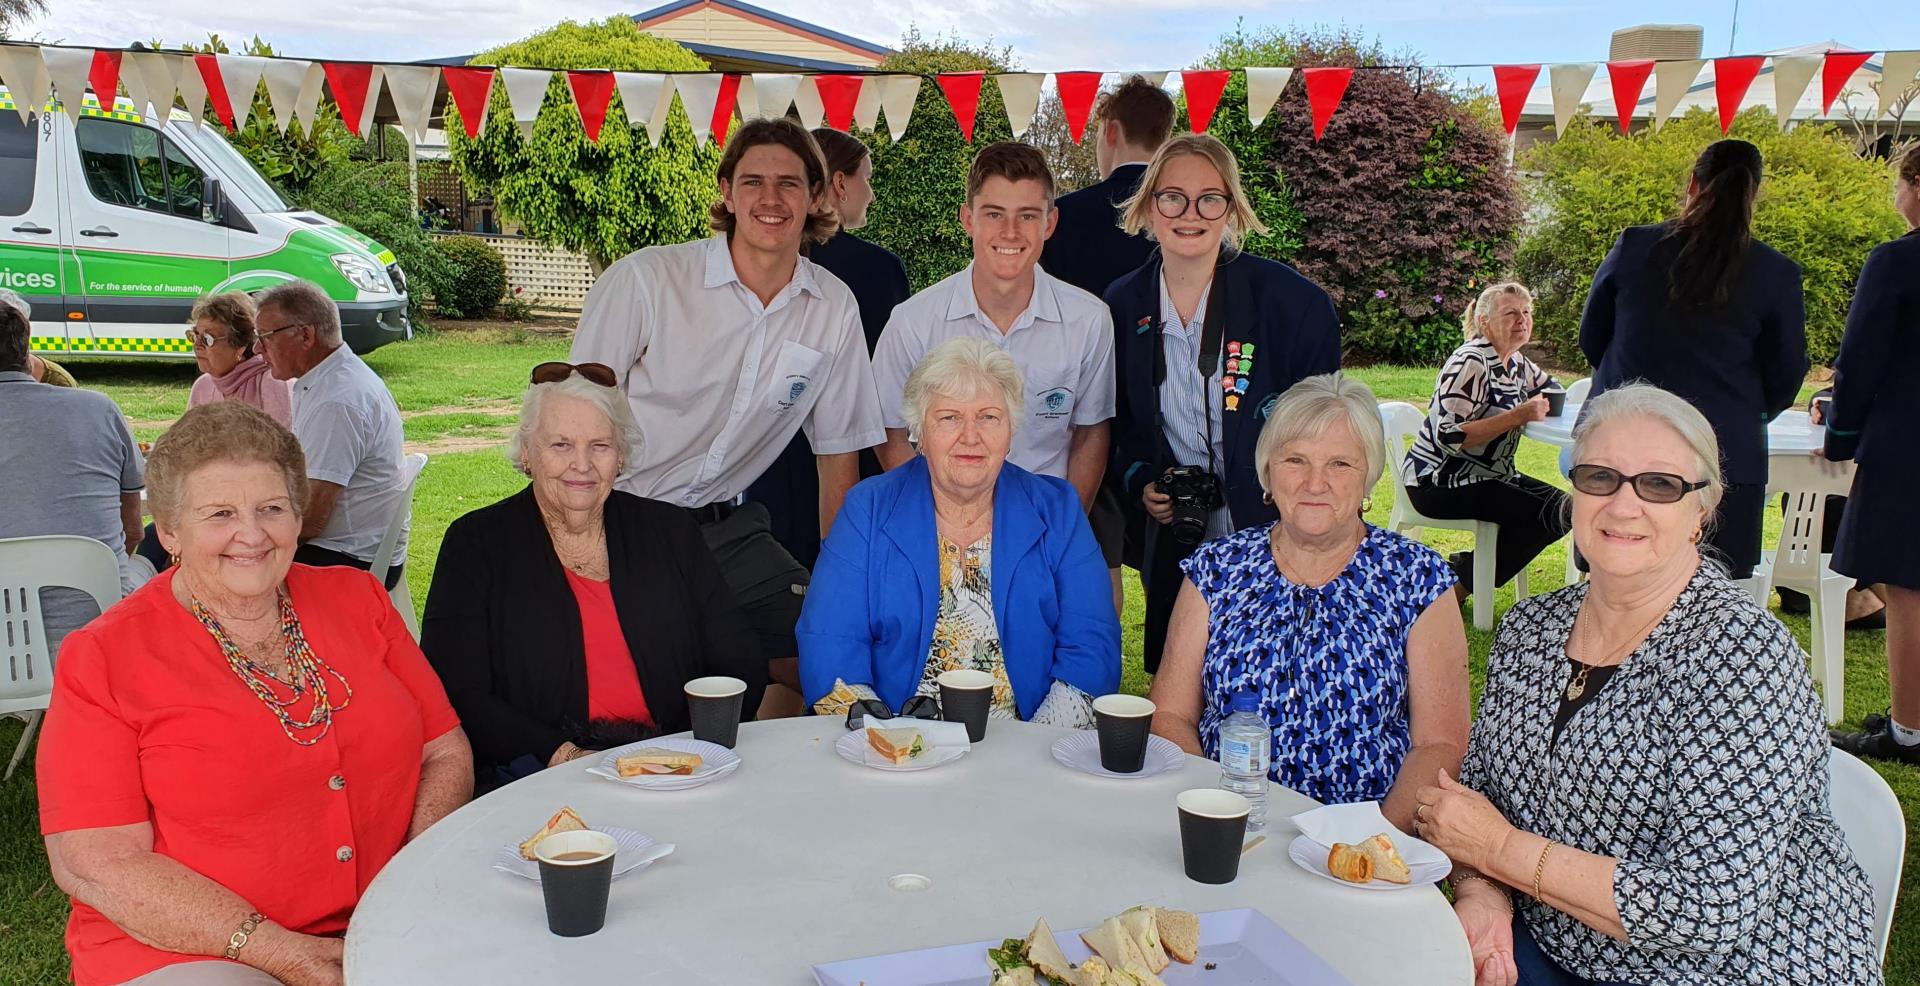 Students and Seniors at the 2020 Seniors Week Garden Party